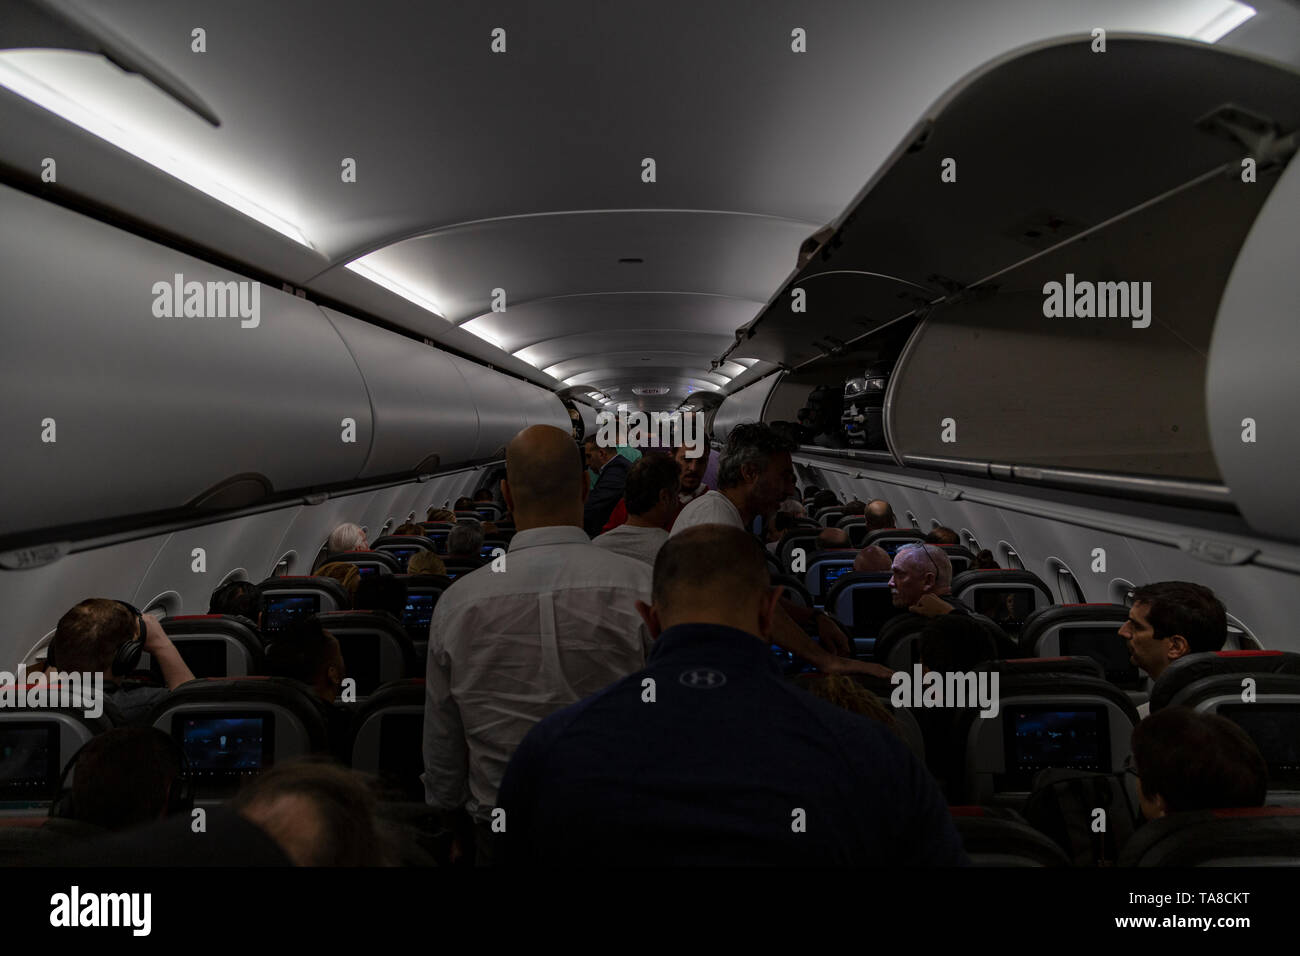 Interior of airplane with passengers get on board Stock Photo